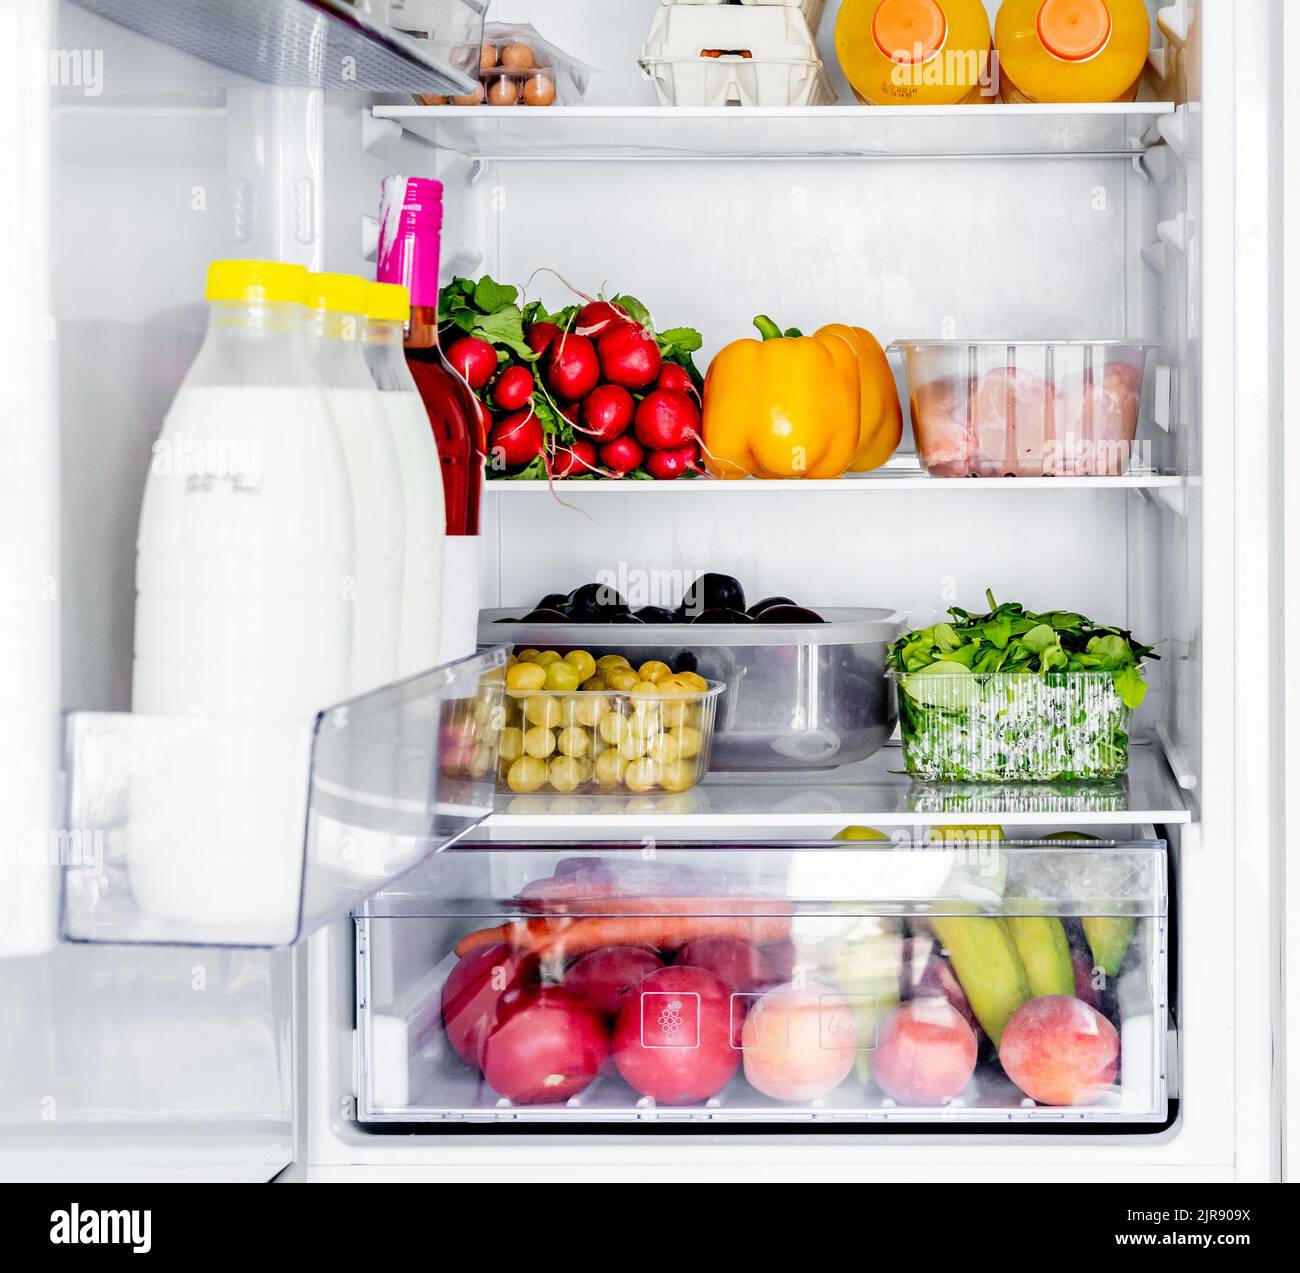 Fridge with fruits and vegetables Stock Photo